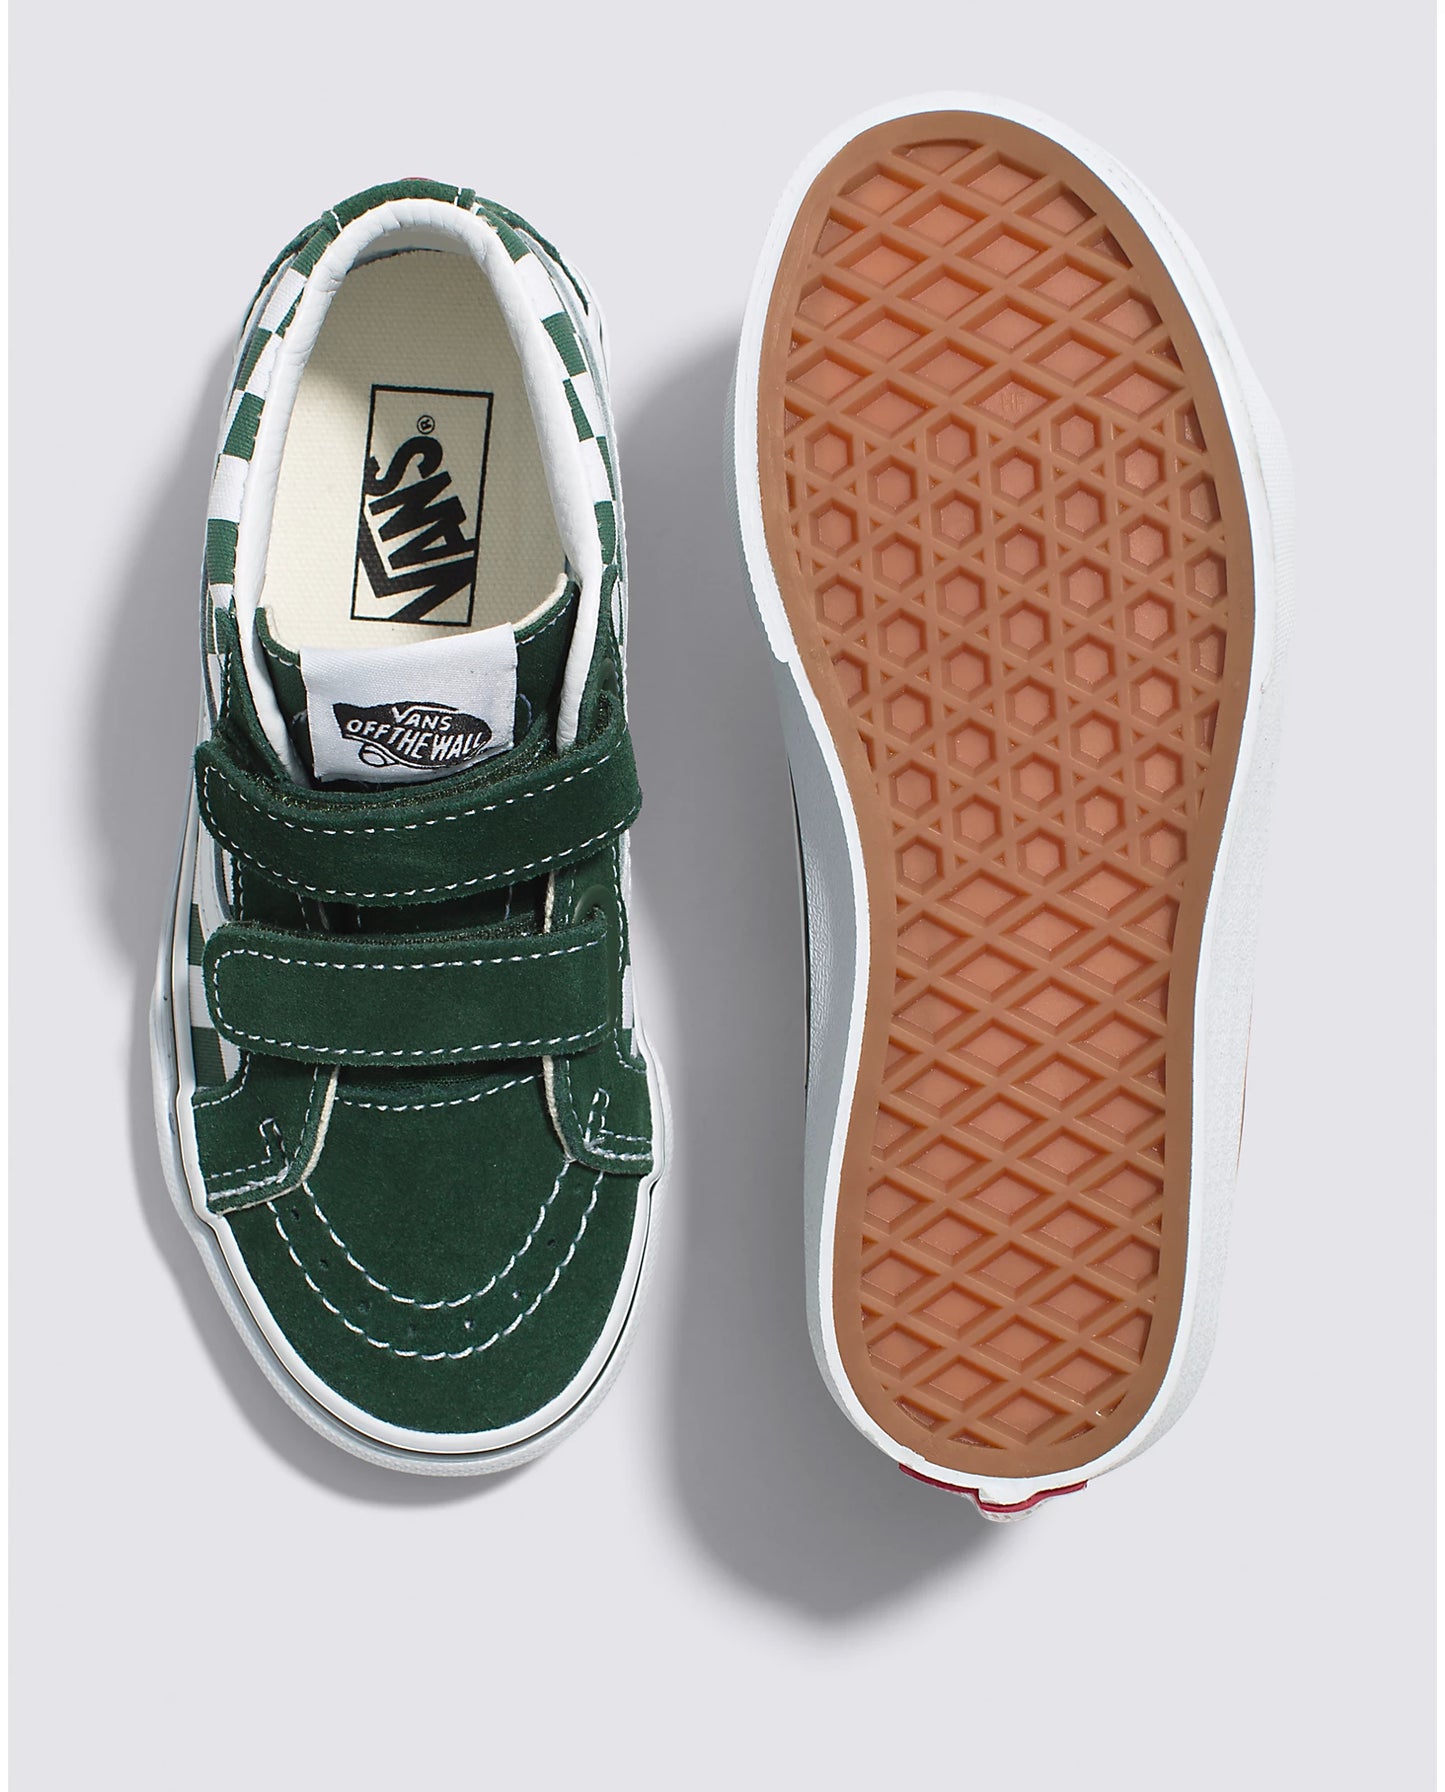 SK8 Checkerboard Green Youth